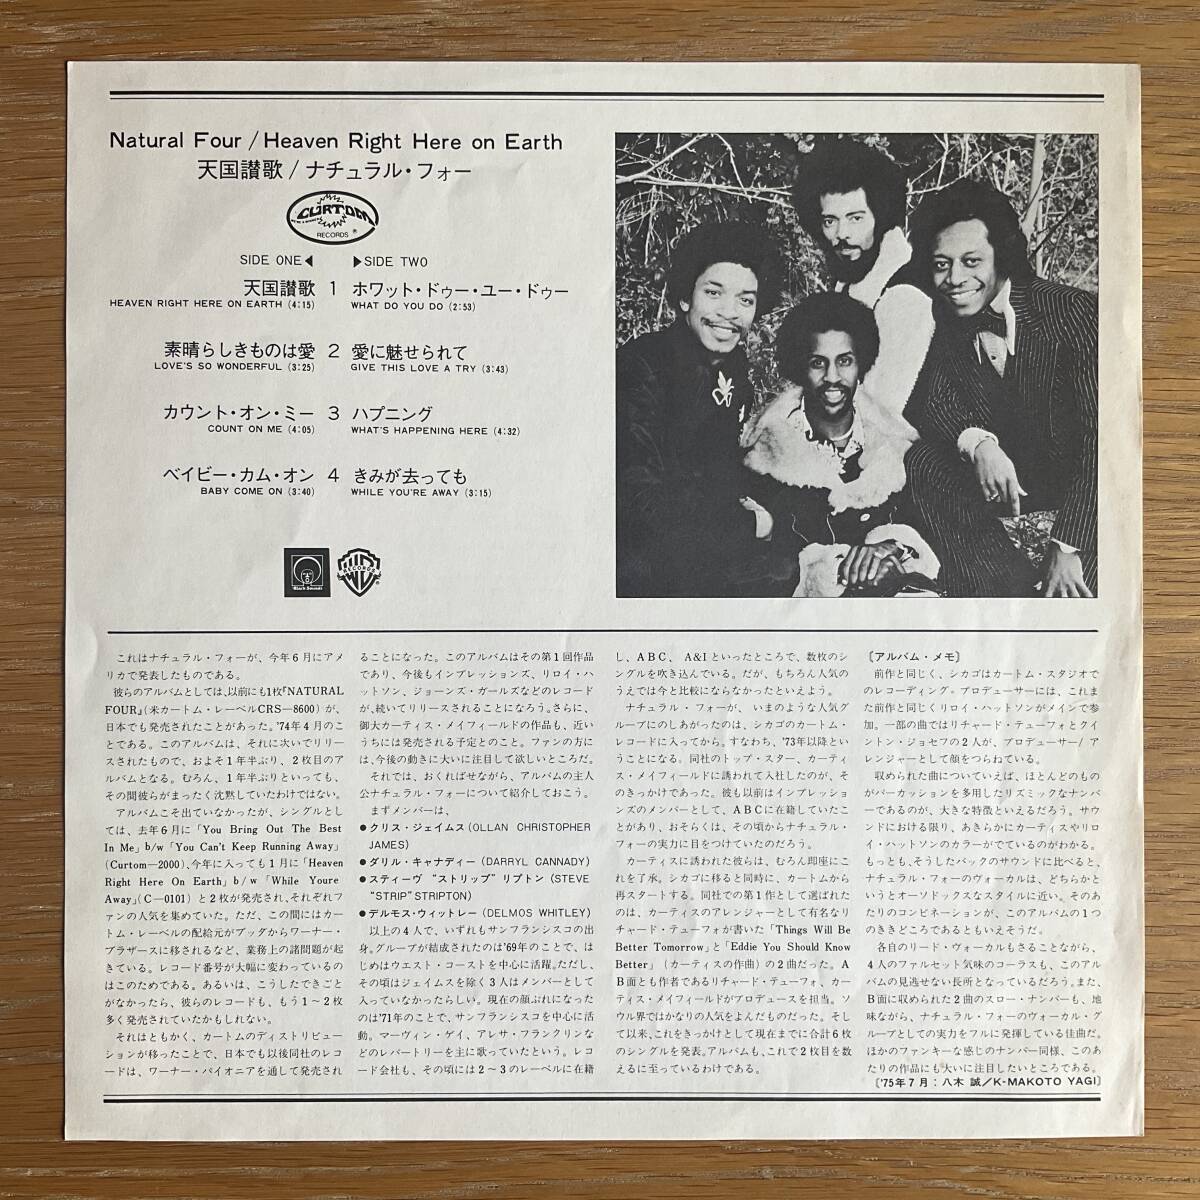 NATURAL FOUR 天国讃歌 Heaven Right Here On Earth 国内盤 LP 帯付き 1975 WARNER P-10043Wの画像4